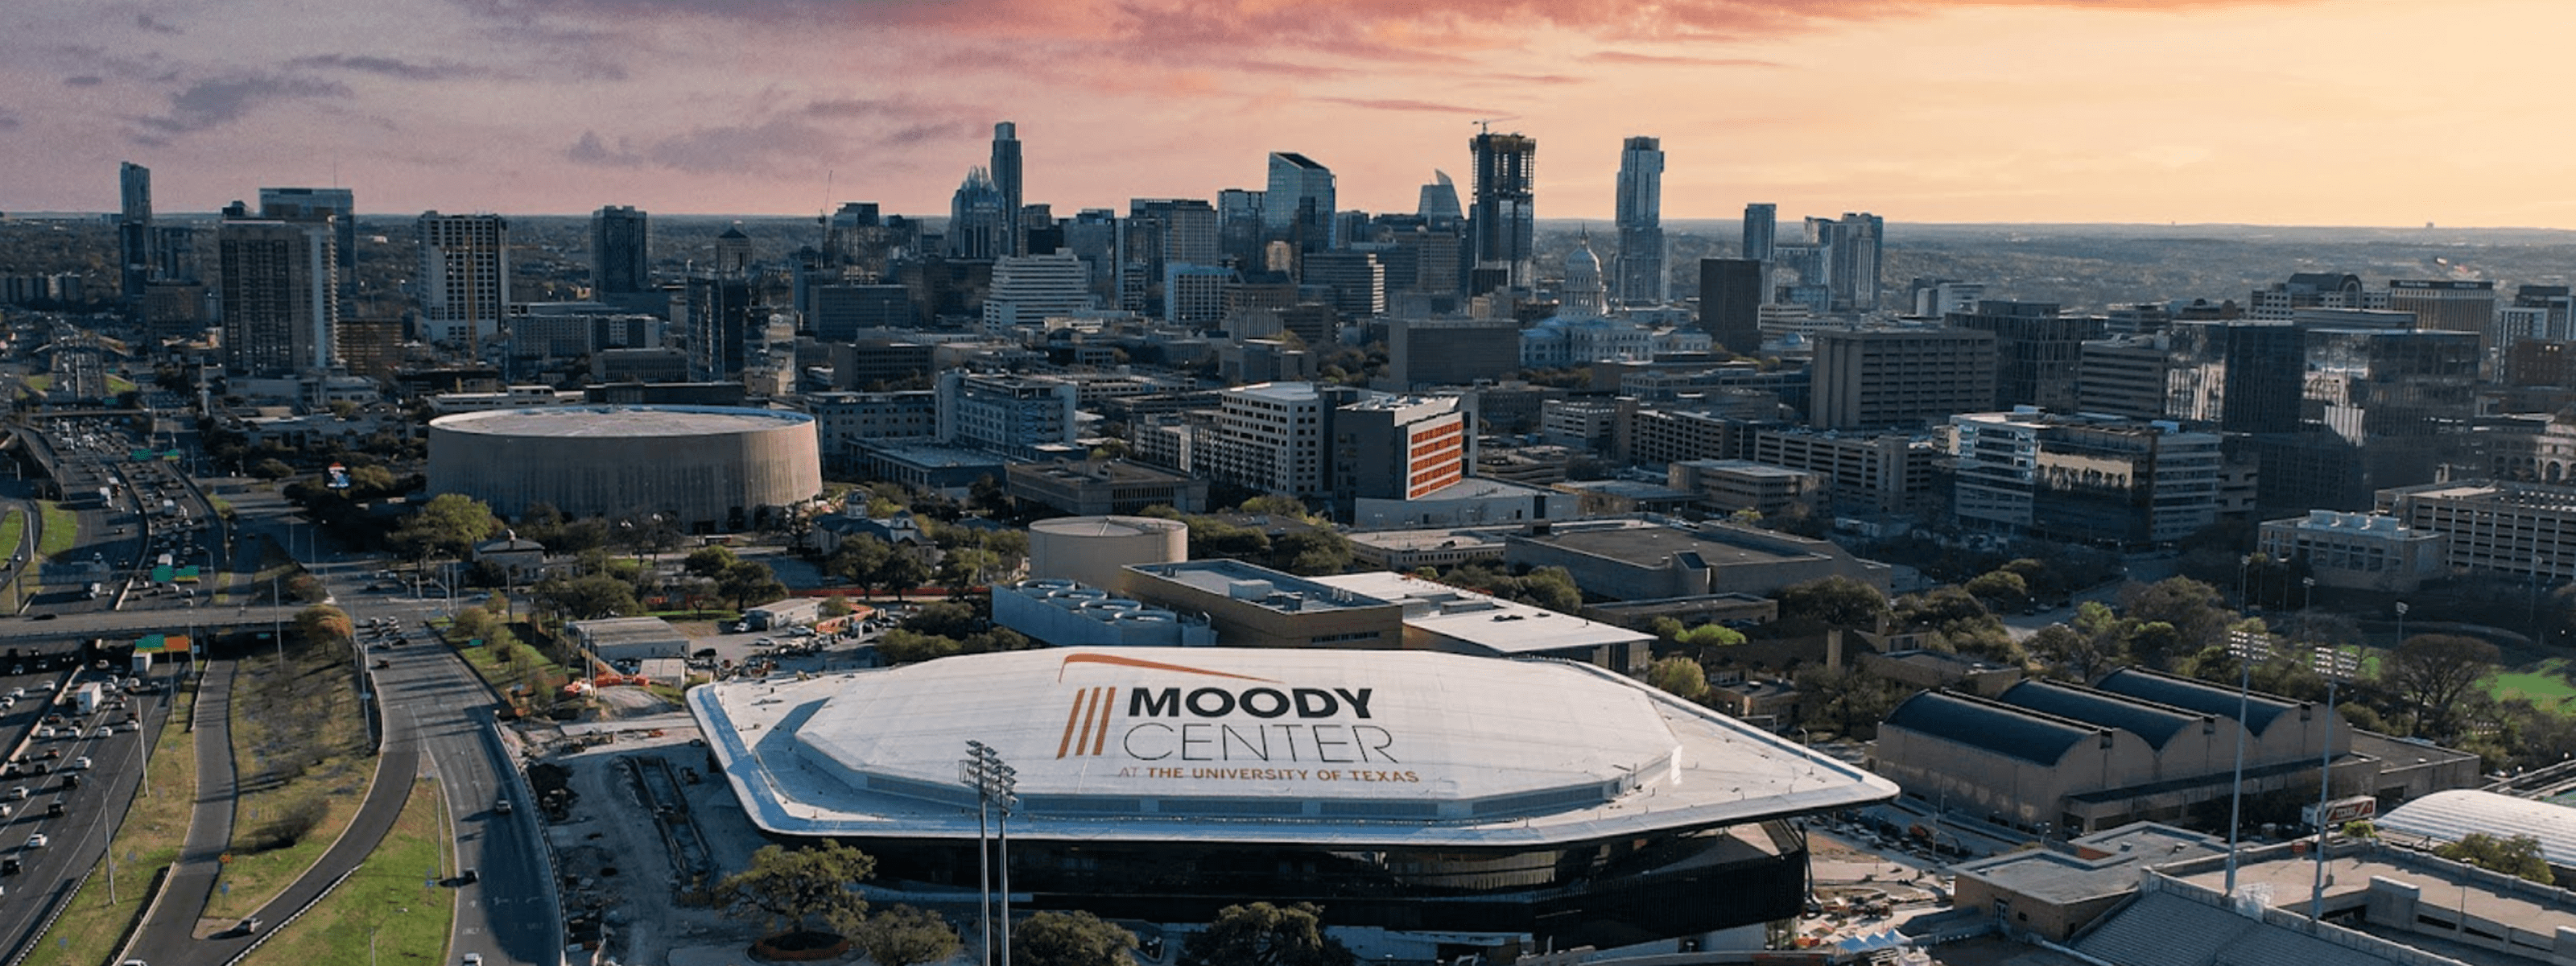 aerial view of the Moody Center at The University of Texas at Austin